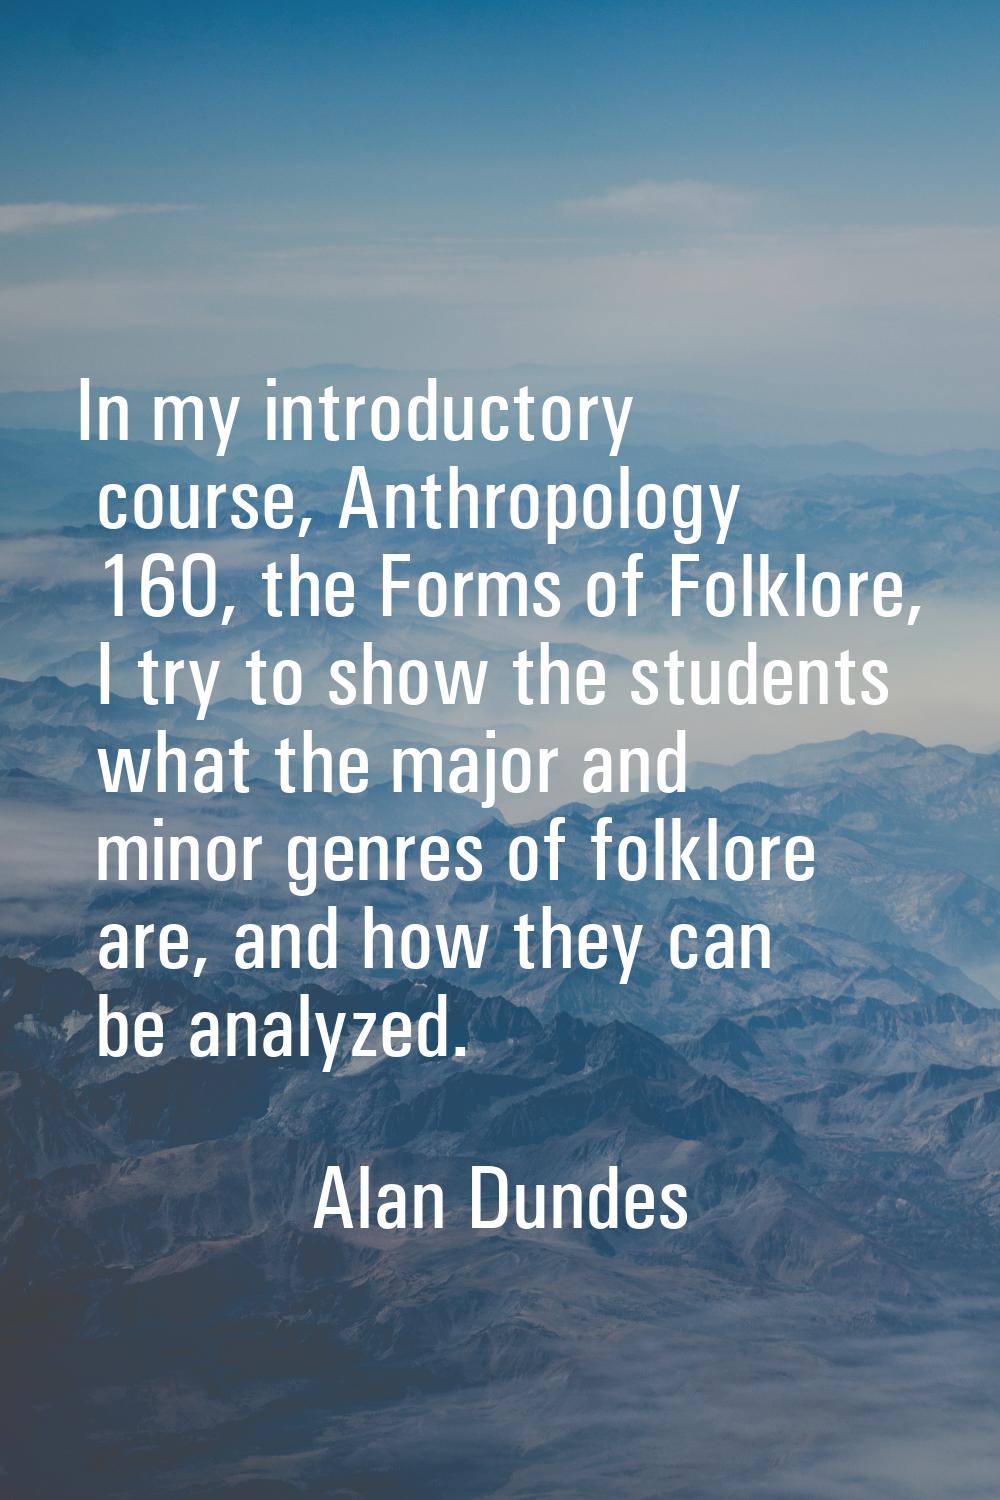 In my introductory course, Anthropology 160, the Forms of Folklore, I try to show the students what